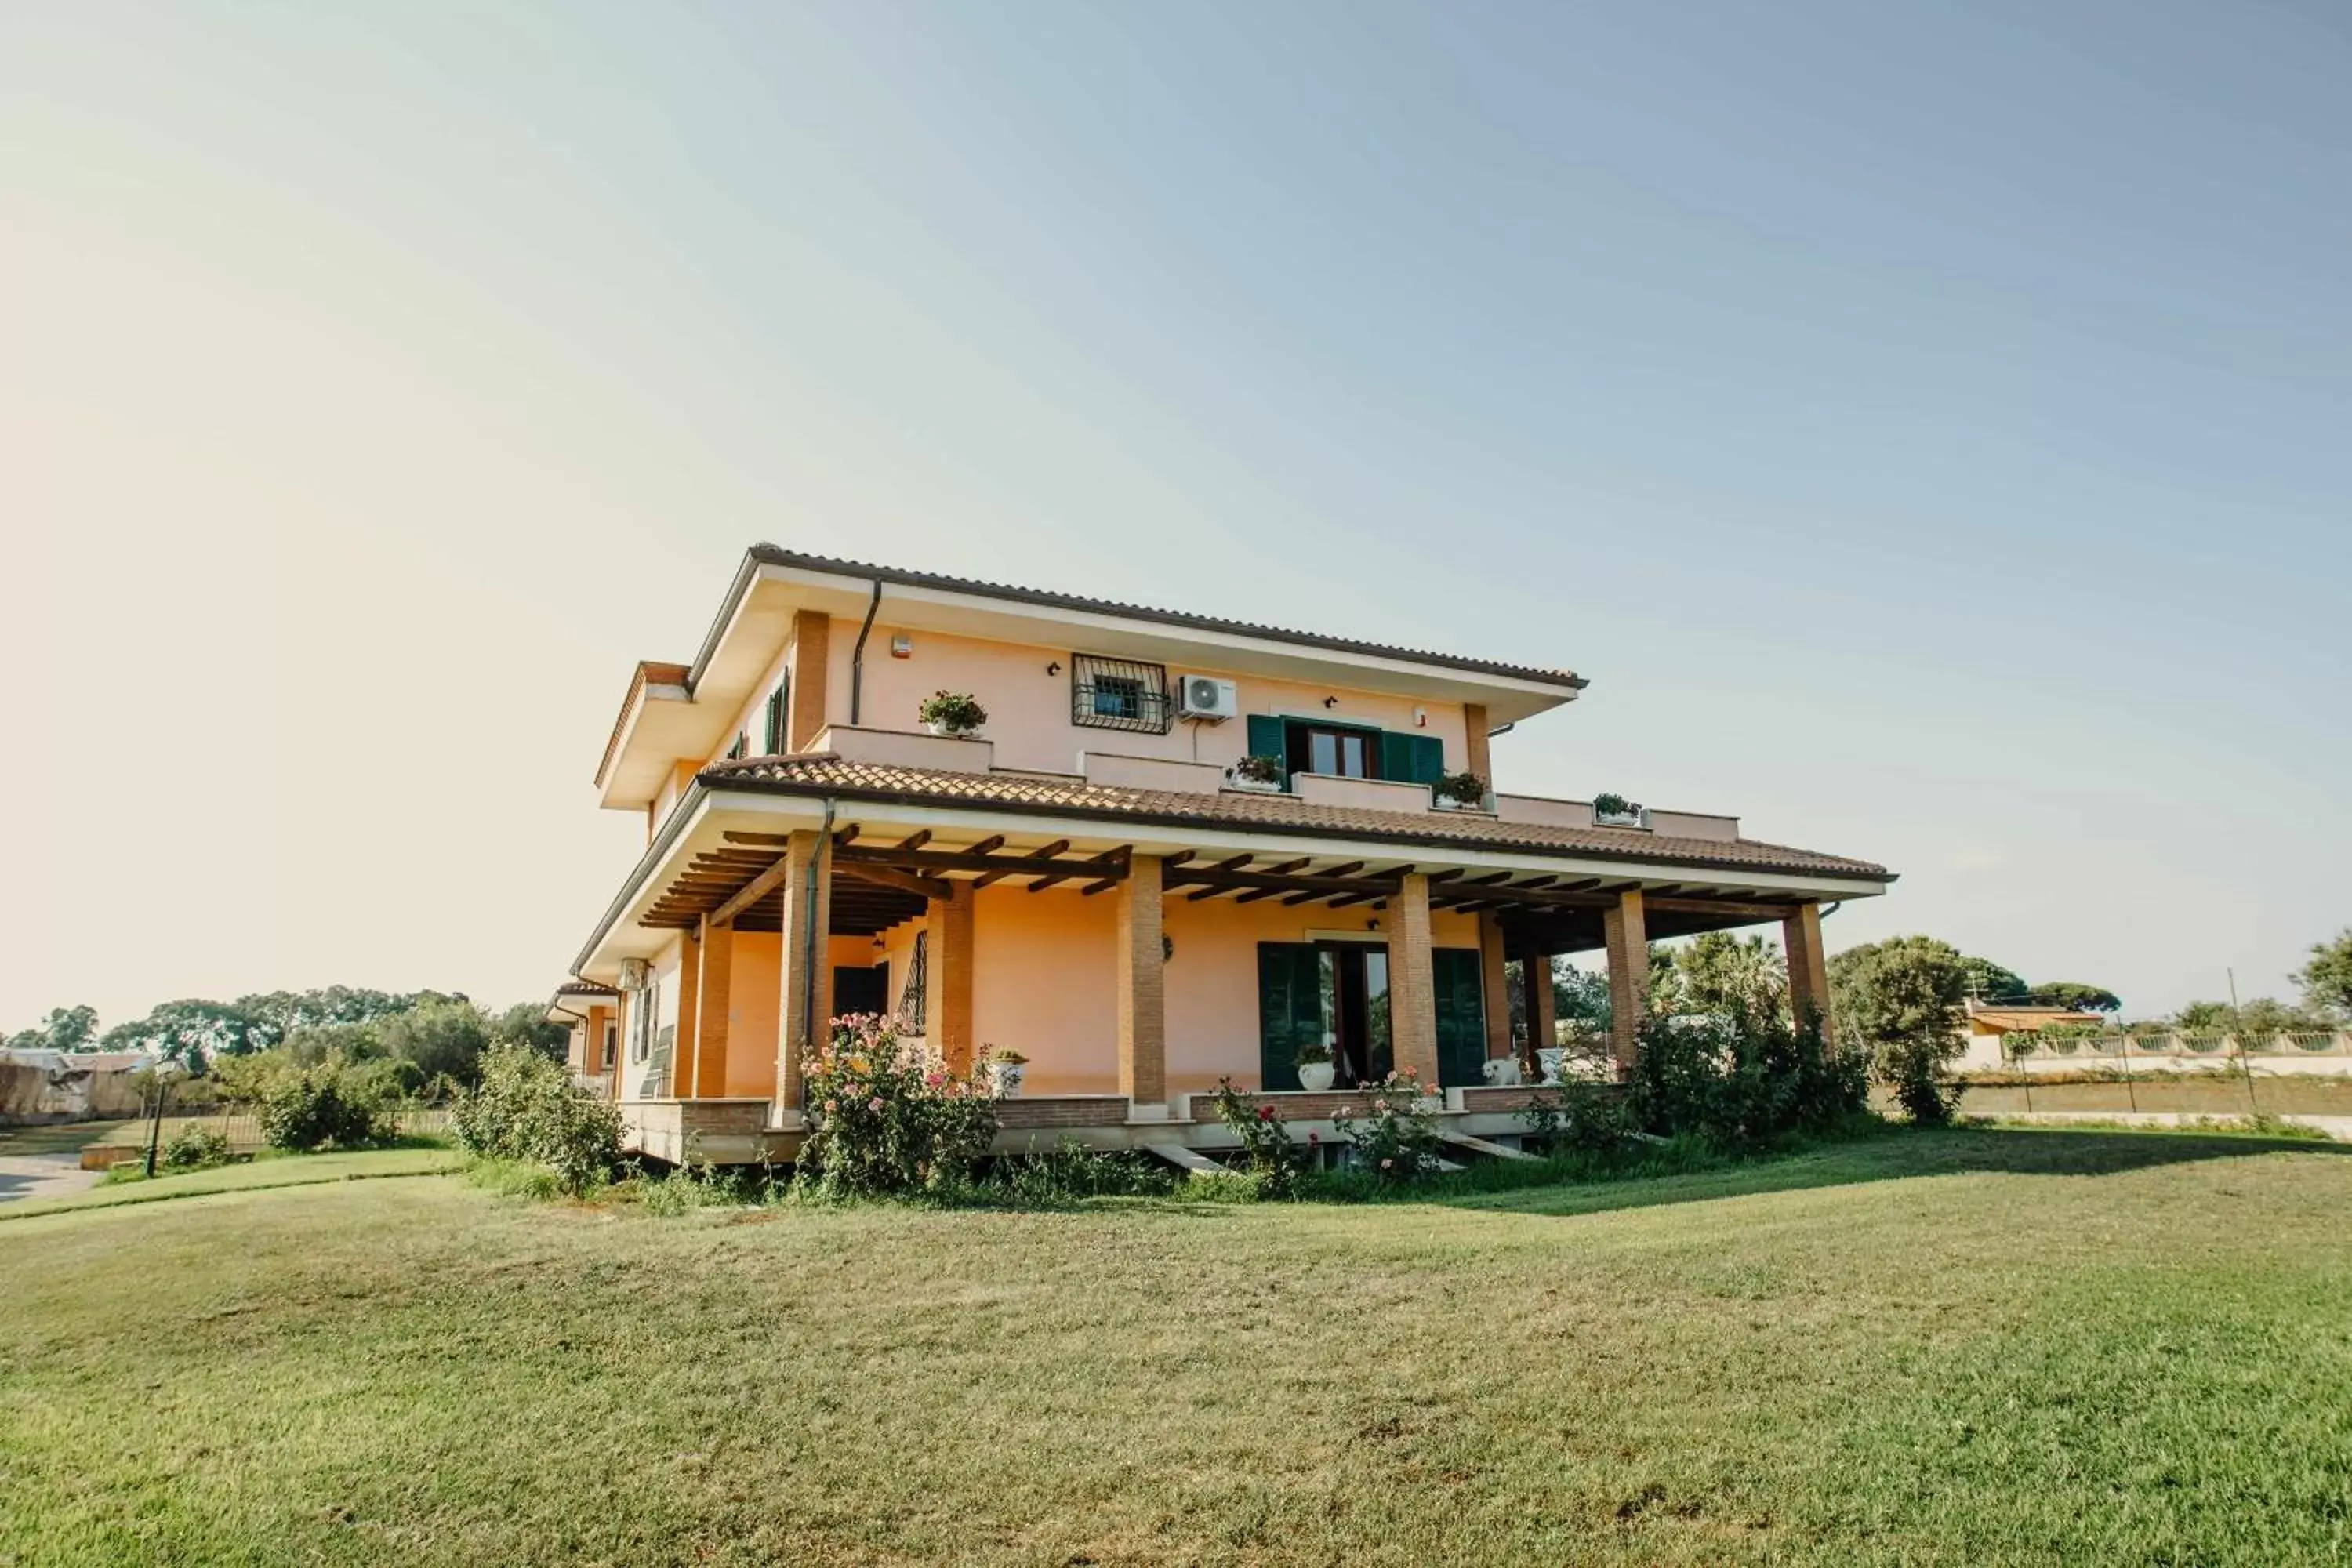 Property Building in Bed and Breakfast Villa Romano